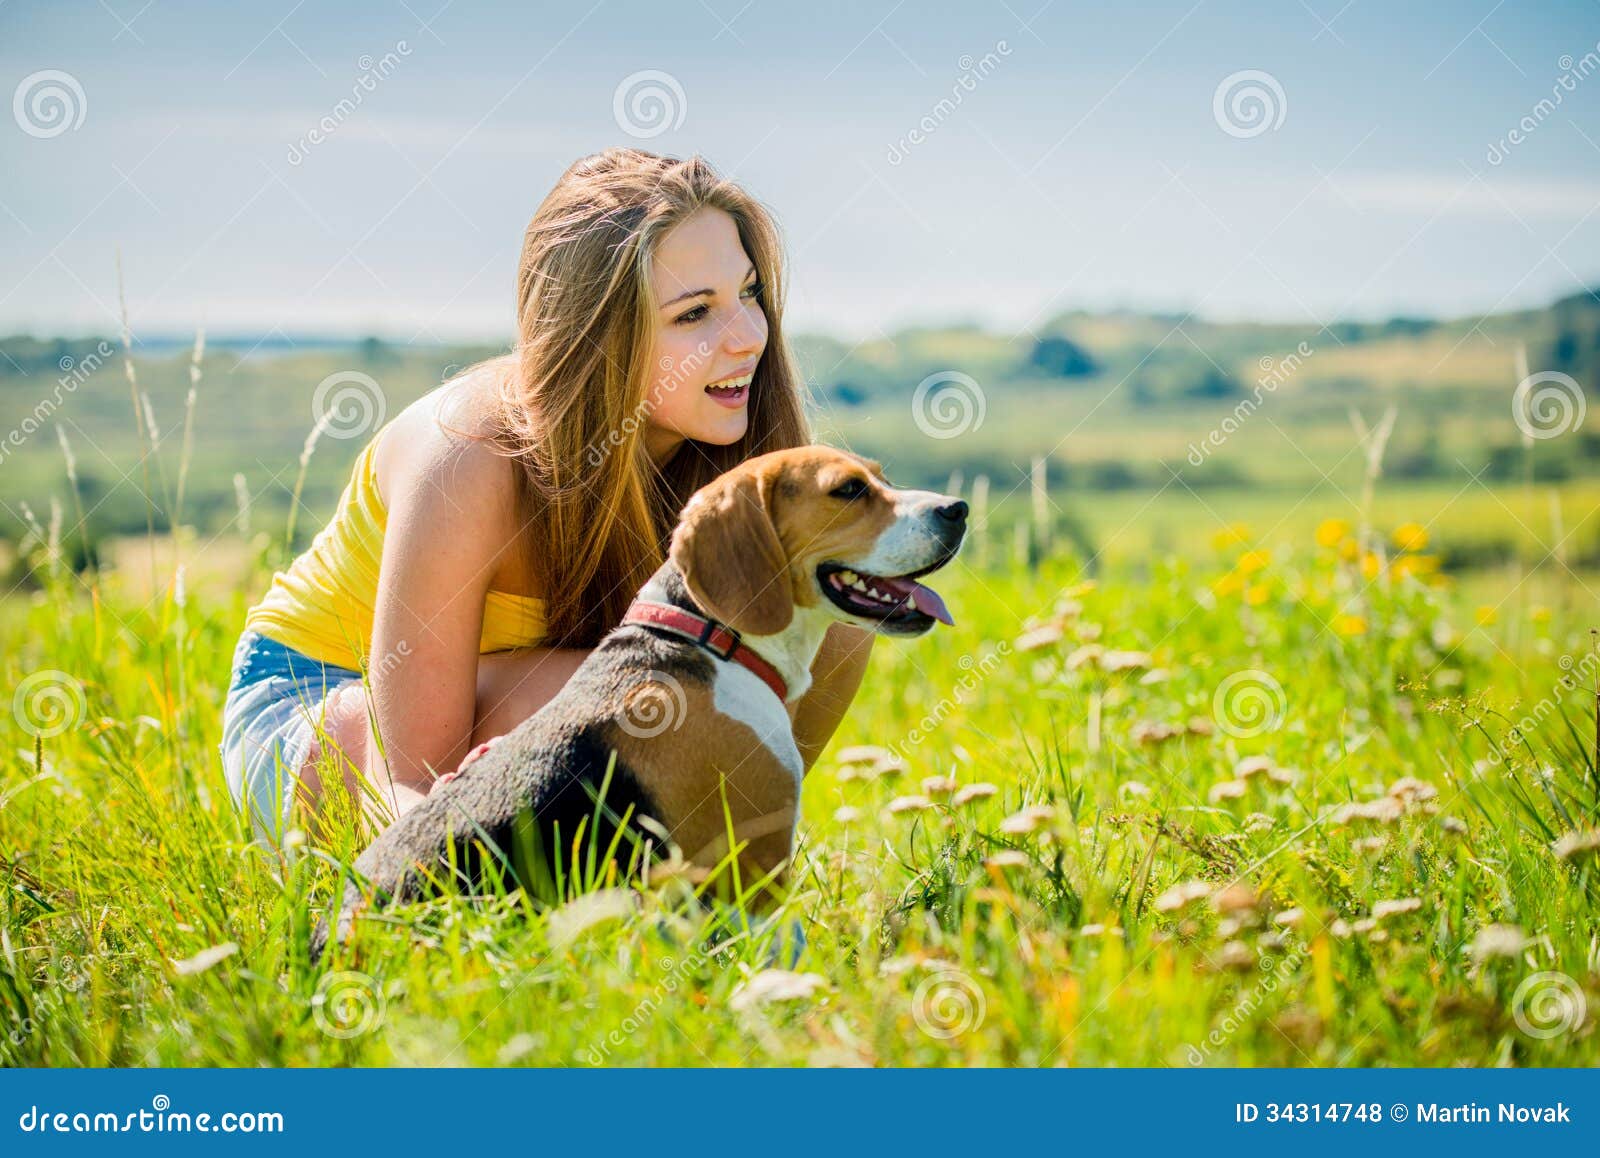 Teenager with her dog stock photo. Image of happy, people - 34314748